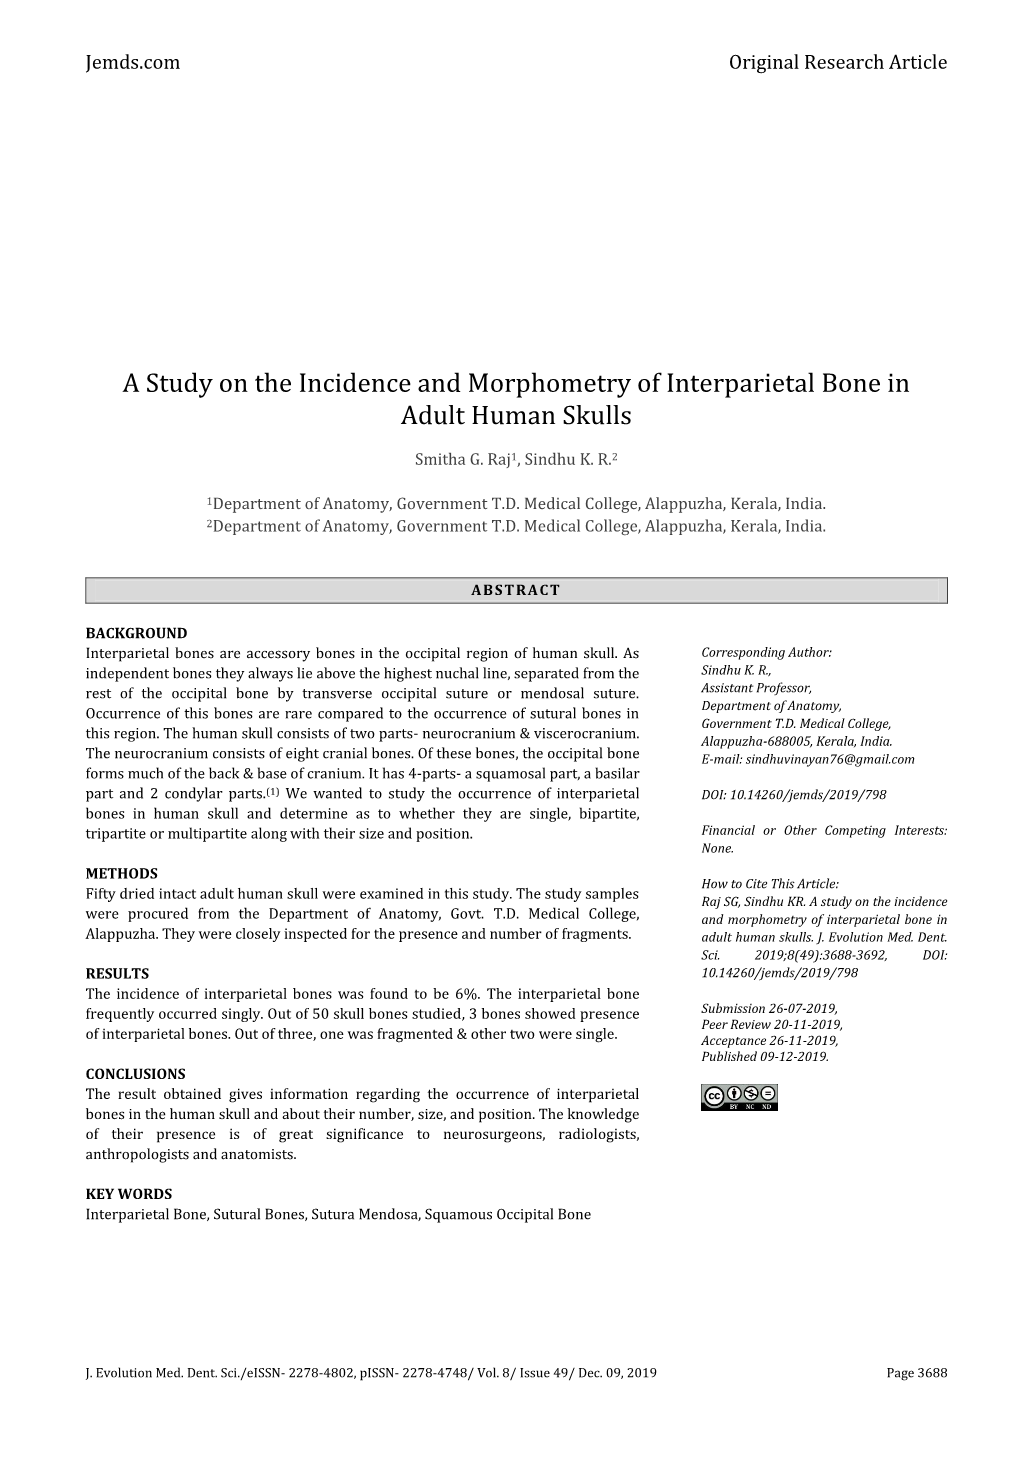 A Study on the Incidence and Morphometry of Interparietal Bone in Adult Human Skulls